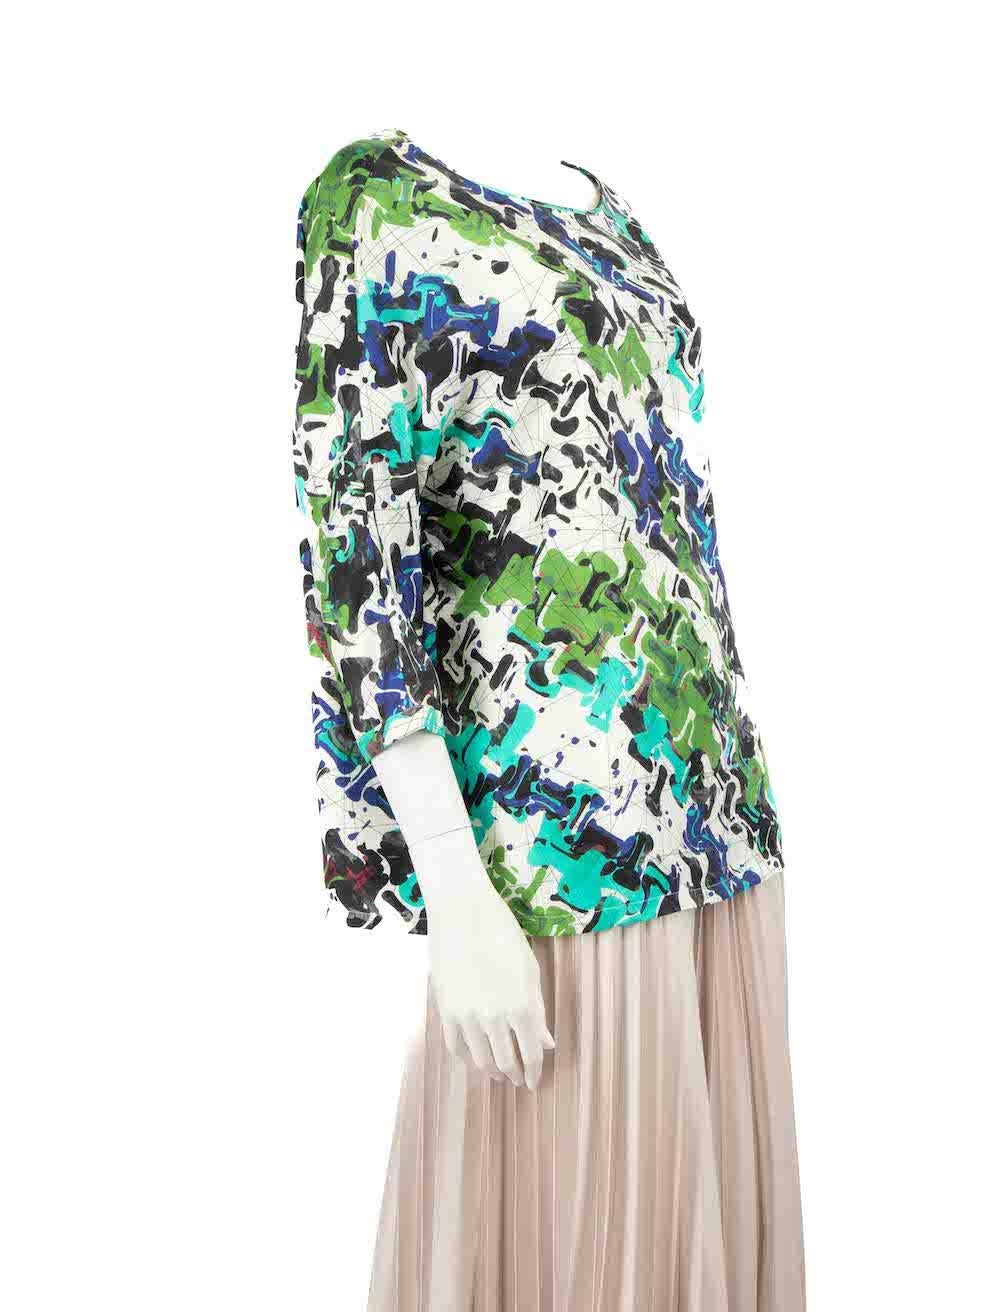 CONDITION is Very good. Hardly any visible wear to top is evident on this used Missoni designer resale item.
 
 Details
 Multicolour- white, black, green, blue
 Silk
 Top
 Round neck
 Long sleeves
 Abstract print
 Oversized fit
 
 
 Made in Romania
